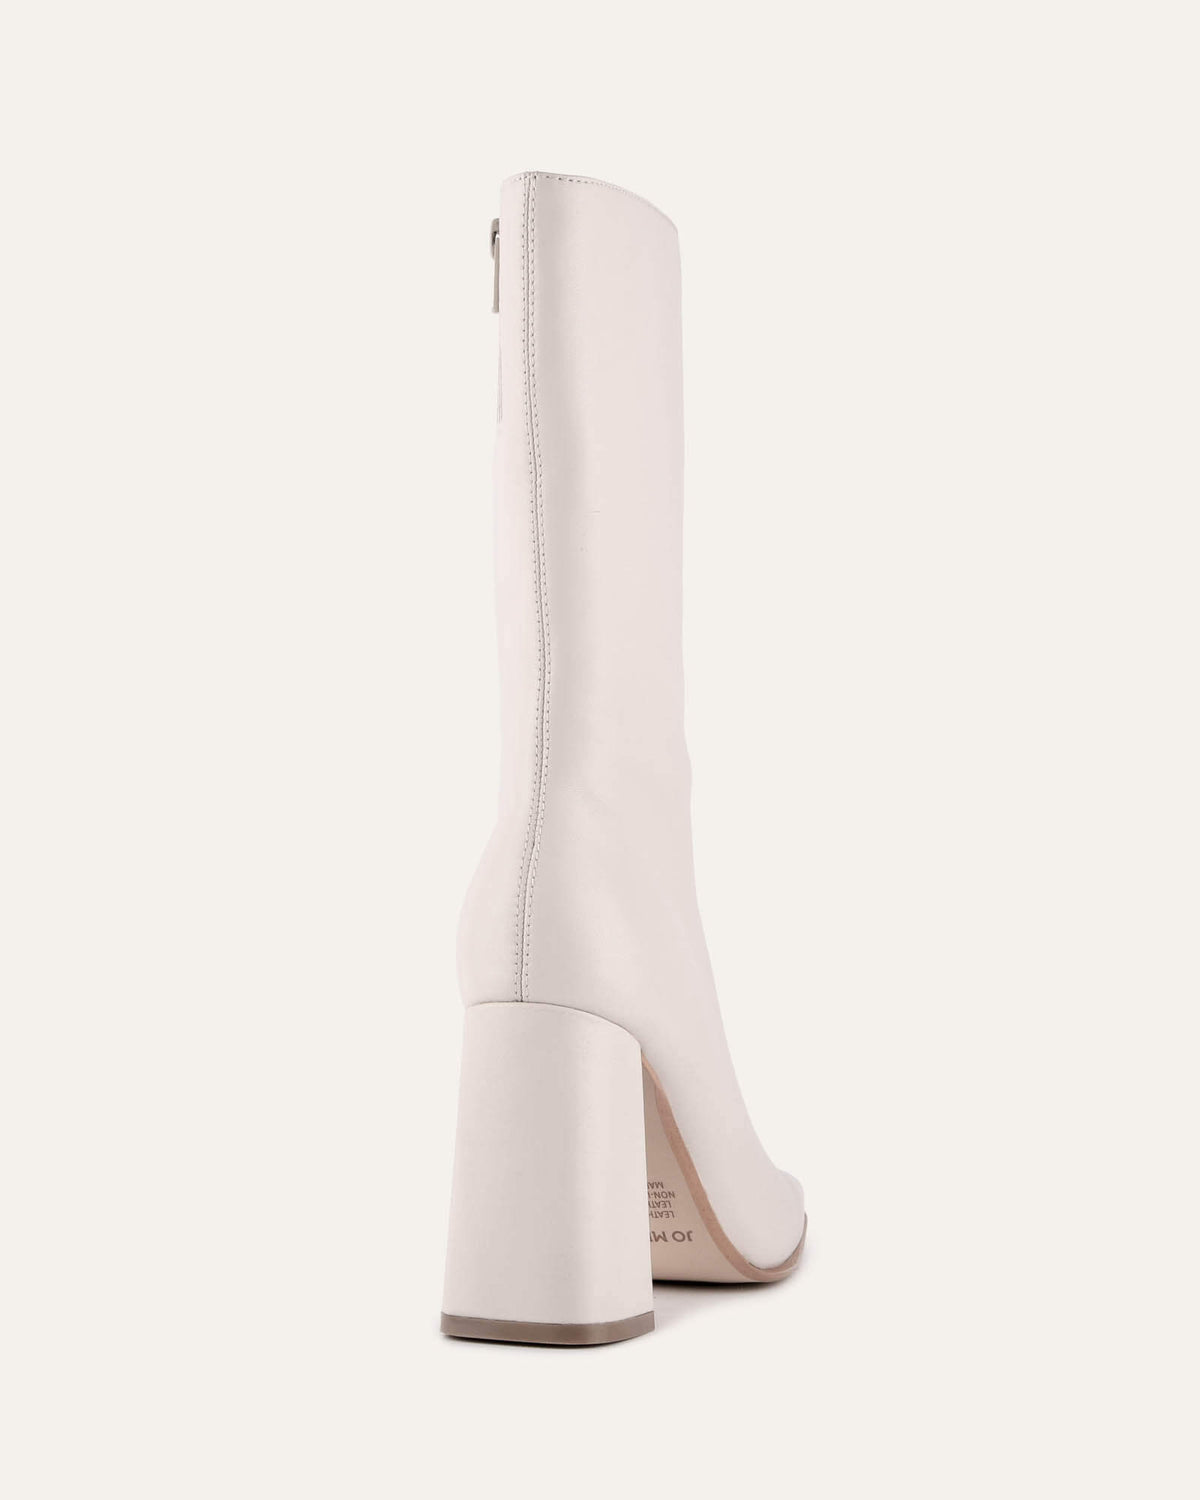 RUSH CALF BOOTS OFF WHITE LEATHER